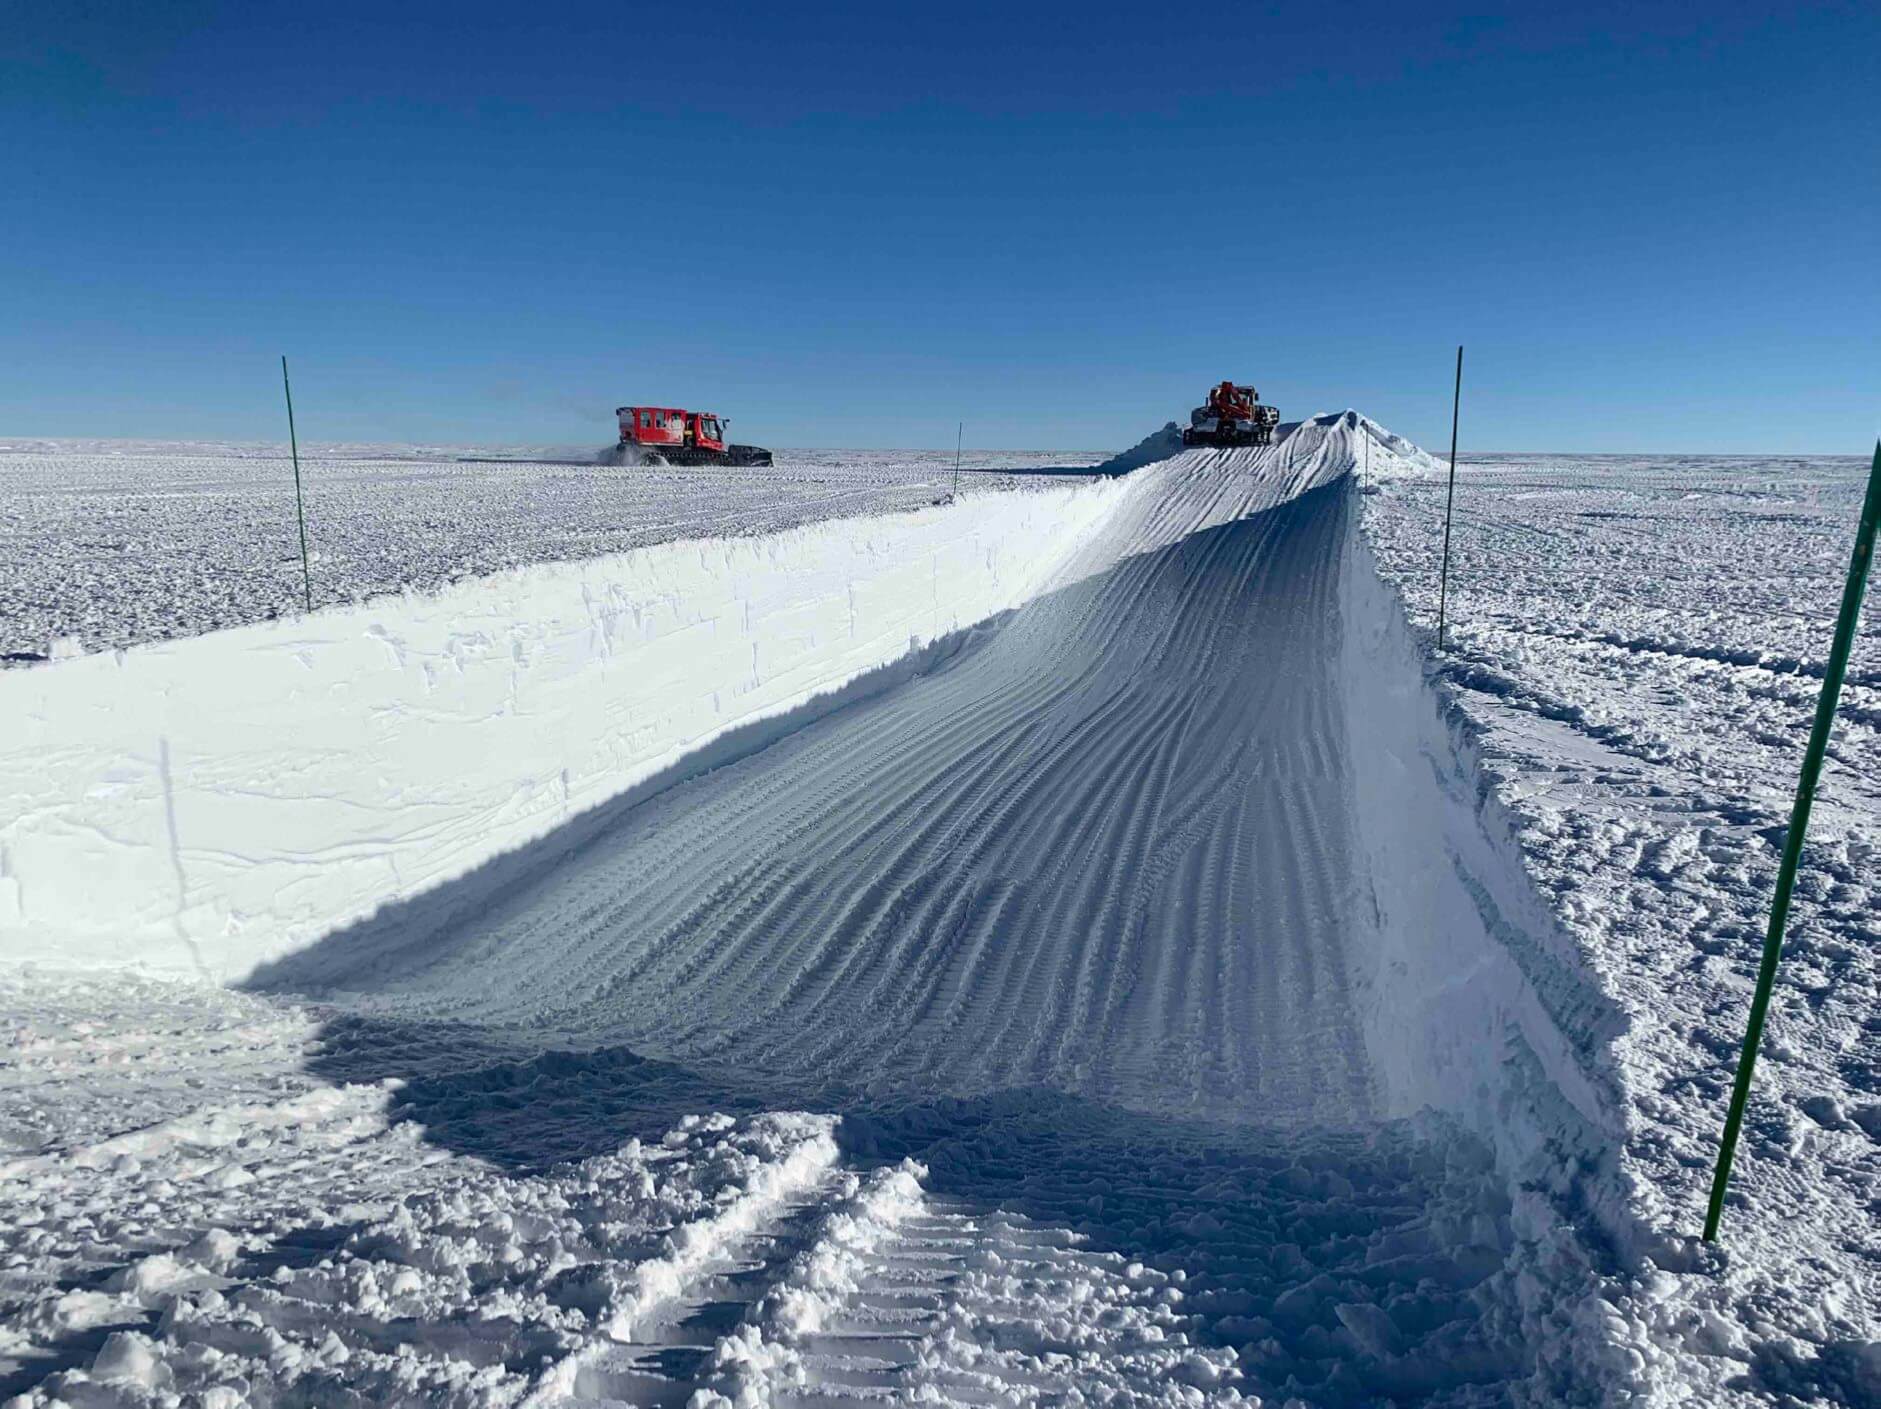 The trench for the ice core containers is ready